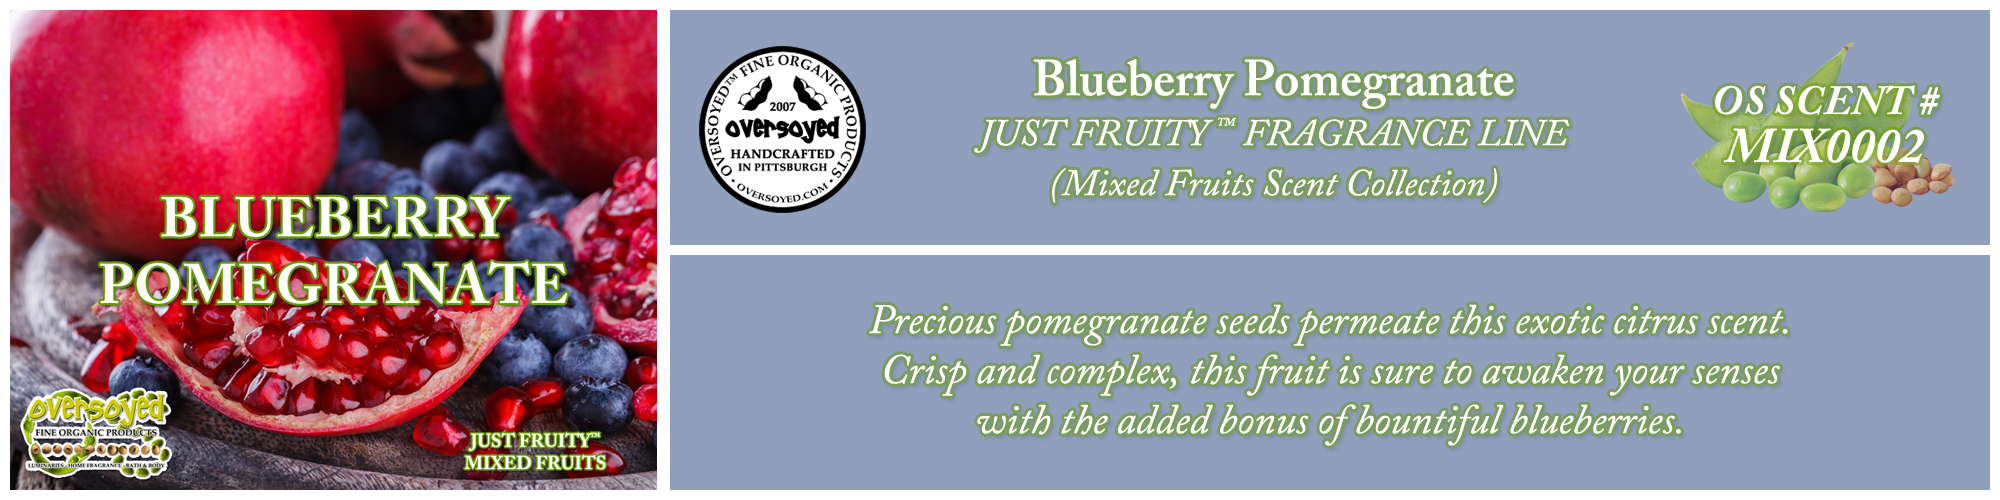 Blueberry Pomegranate Handcrafted Products Collection